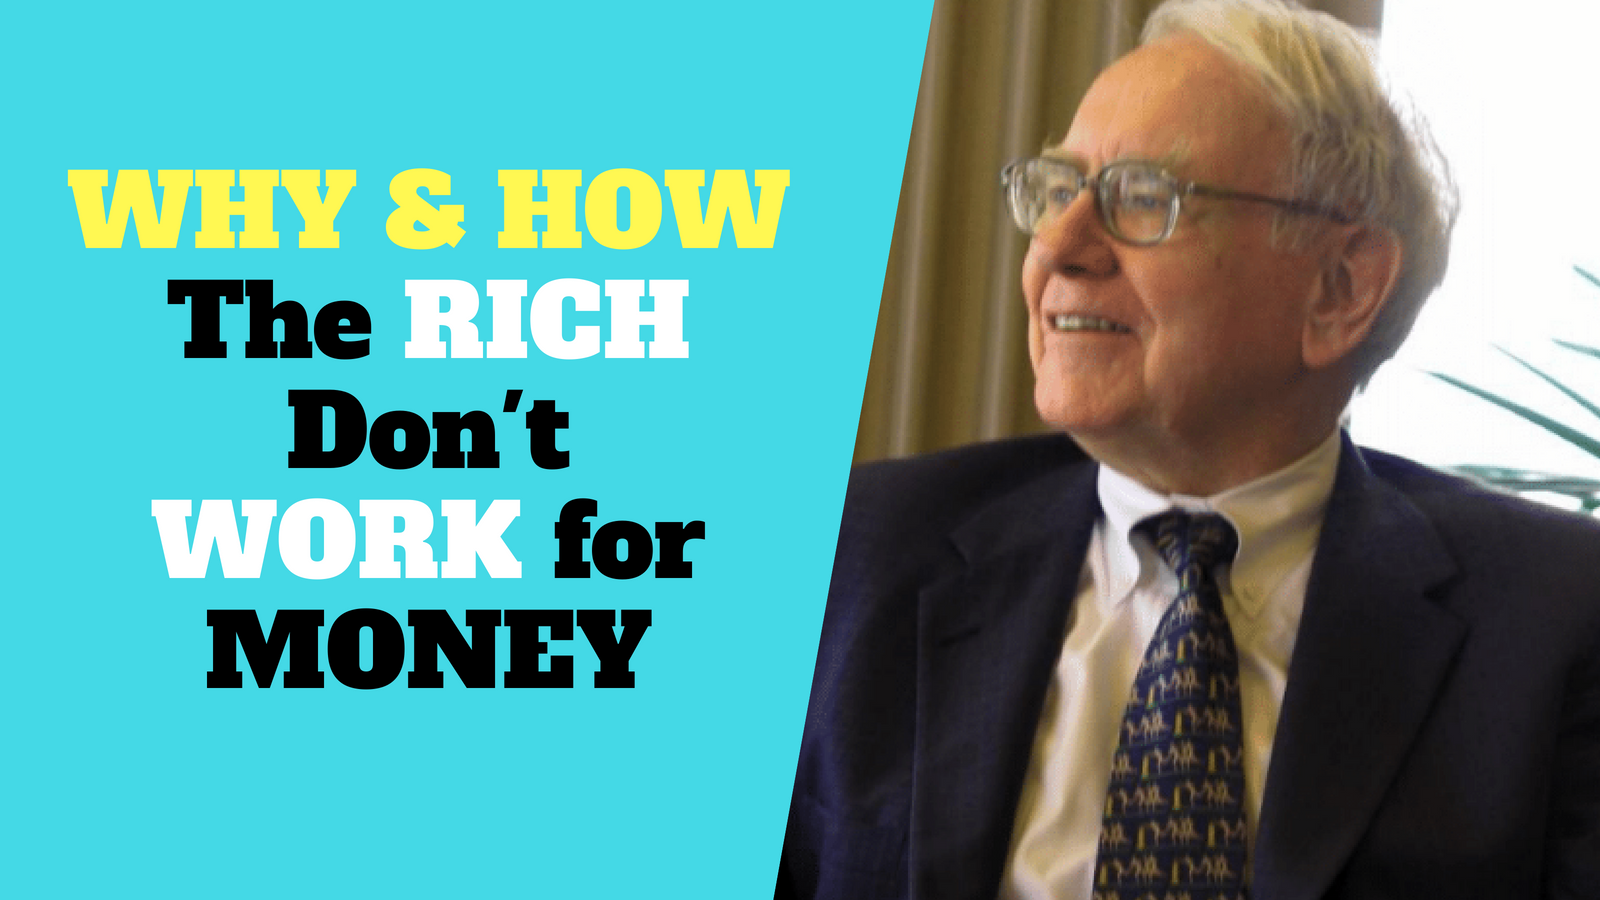 The Rich Don’t Work For Money